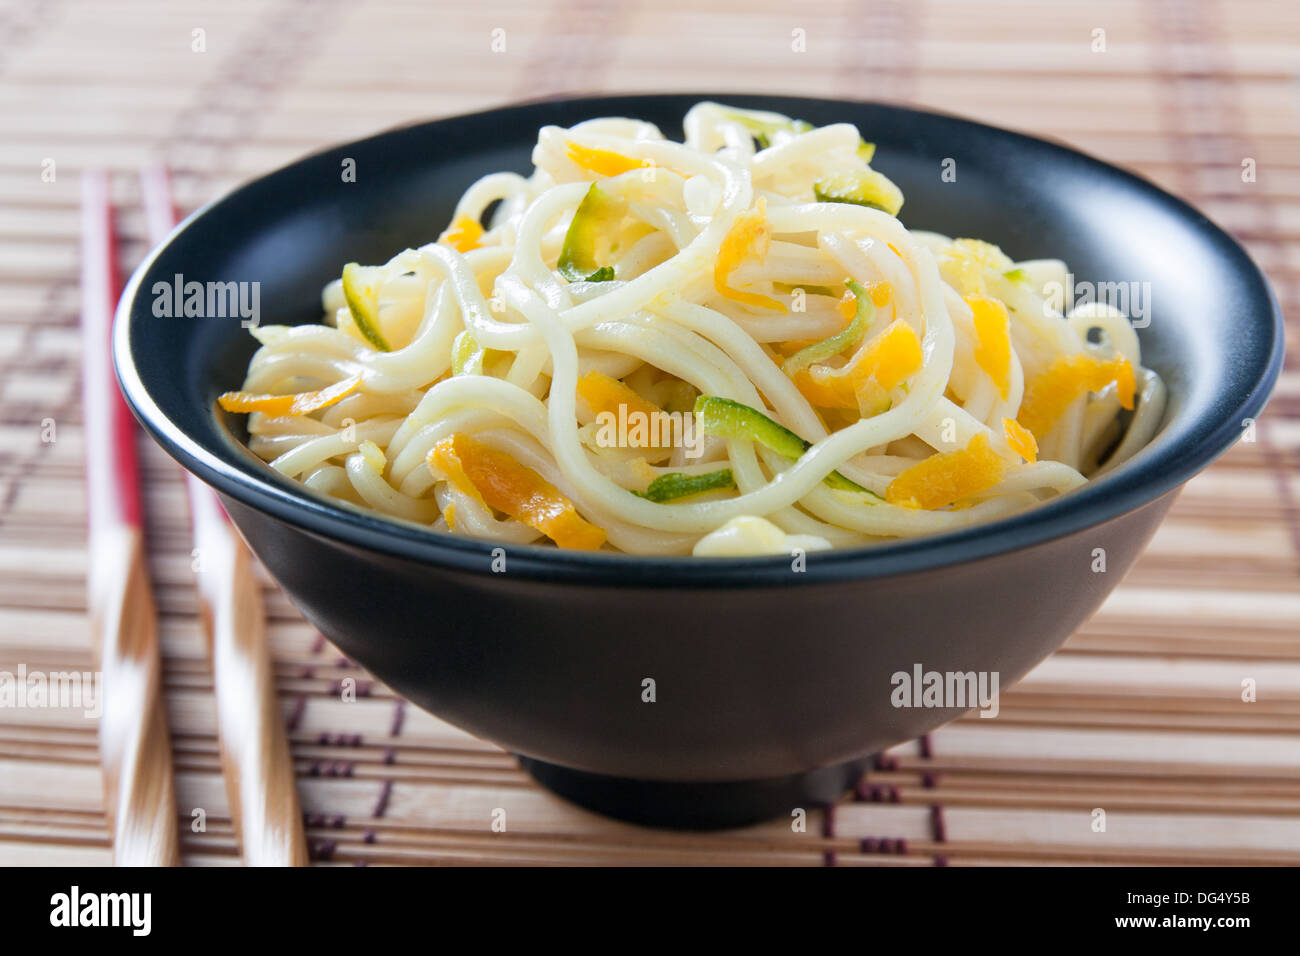 Chinese noodle bowl sauteed with vegetables Stock Photo